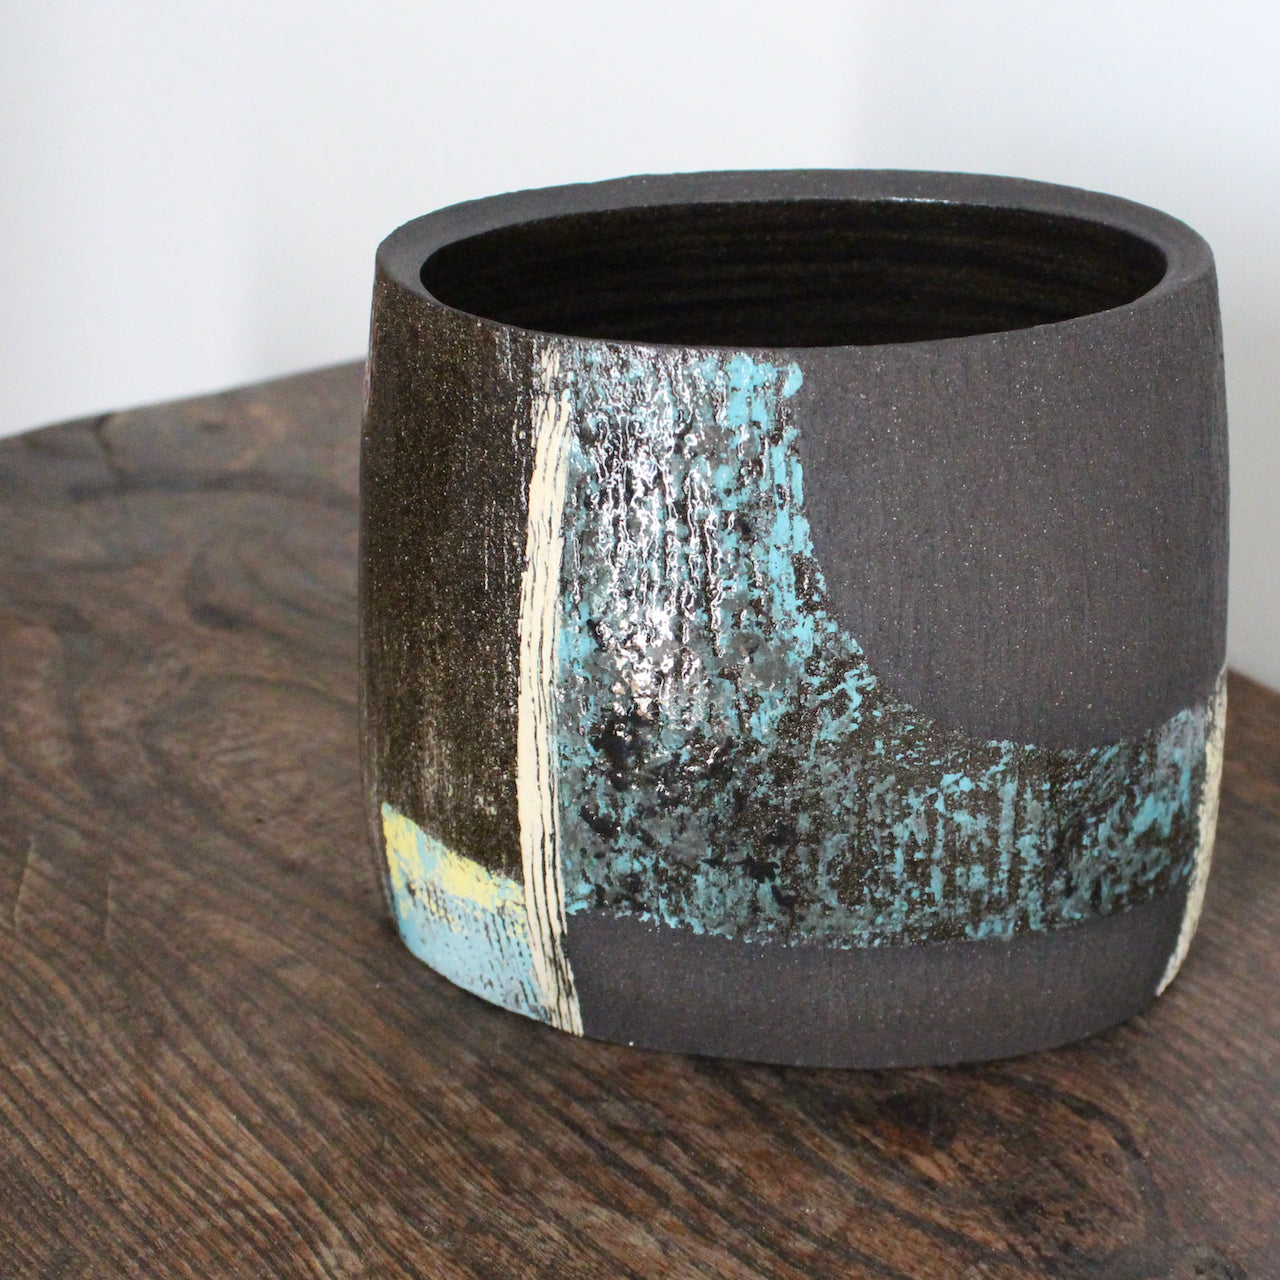 A hand built vessel with blue and white glaze on dark brown clay by Cornish Artist Anthea Bowen